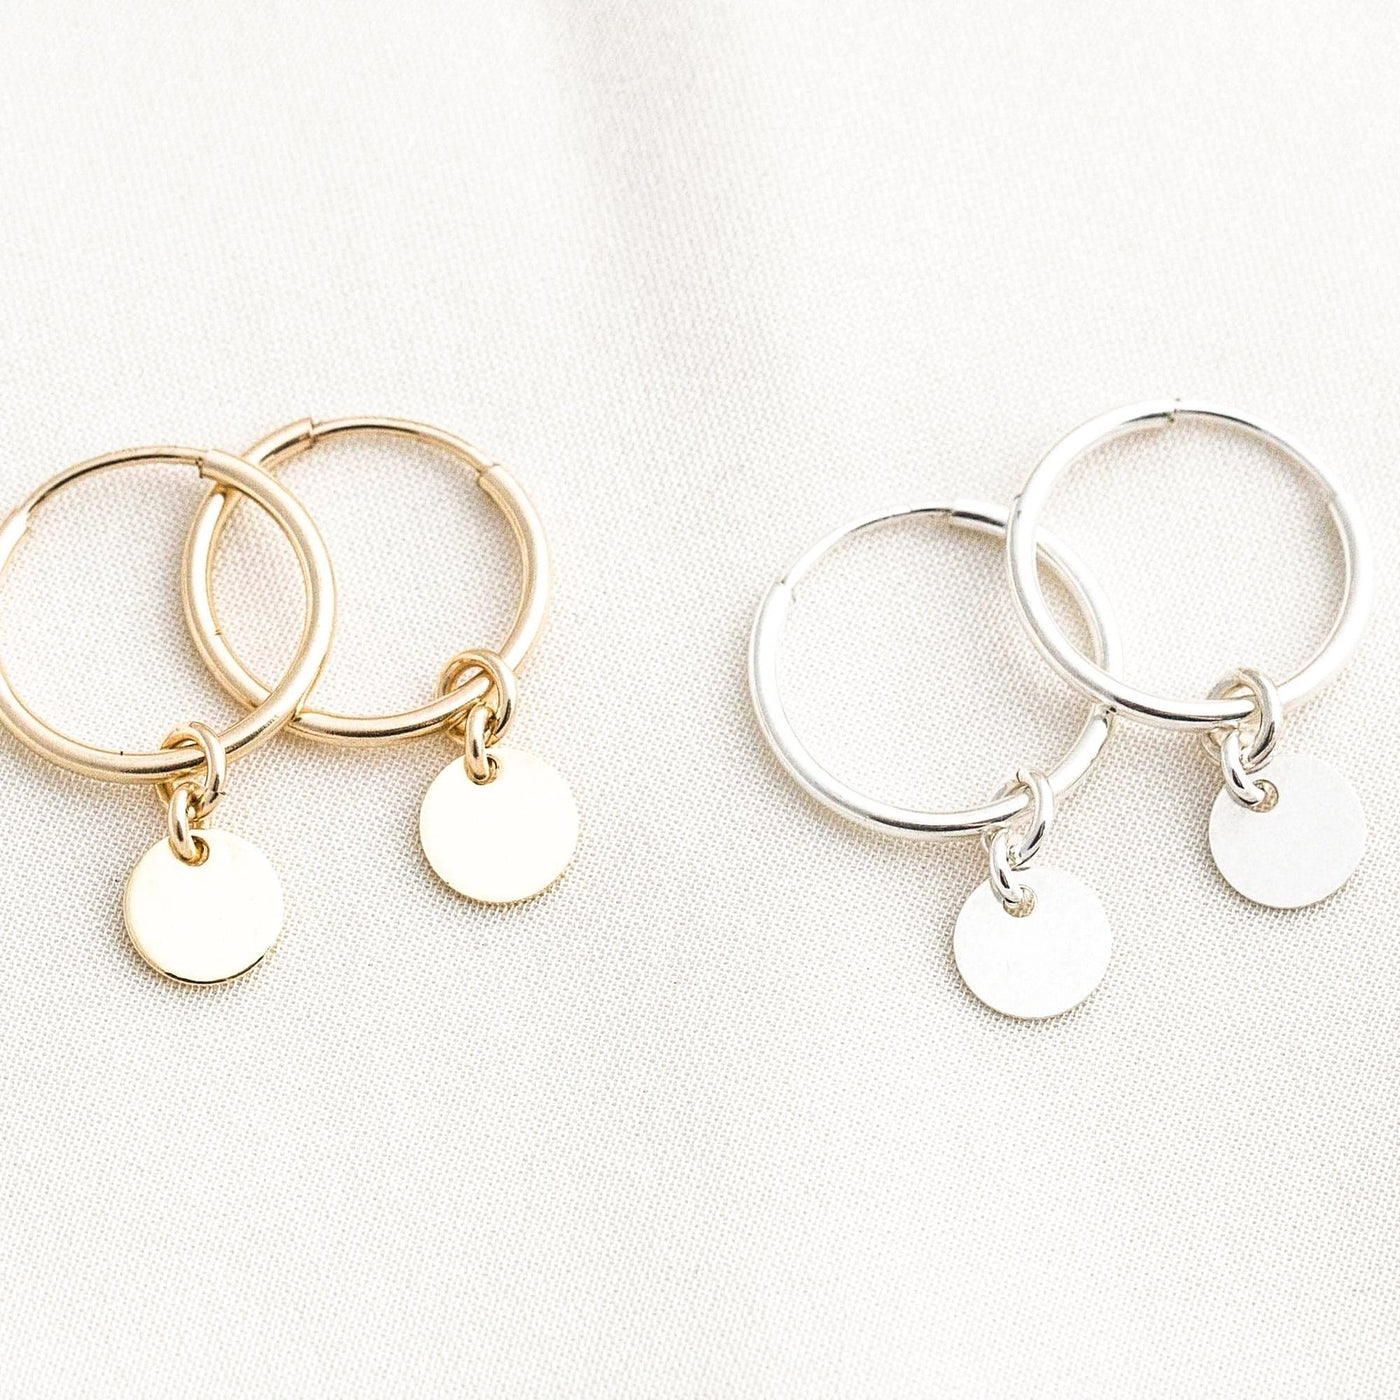 Tiny Coin Hoops by Simple & Dainty Jewelry